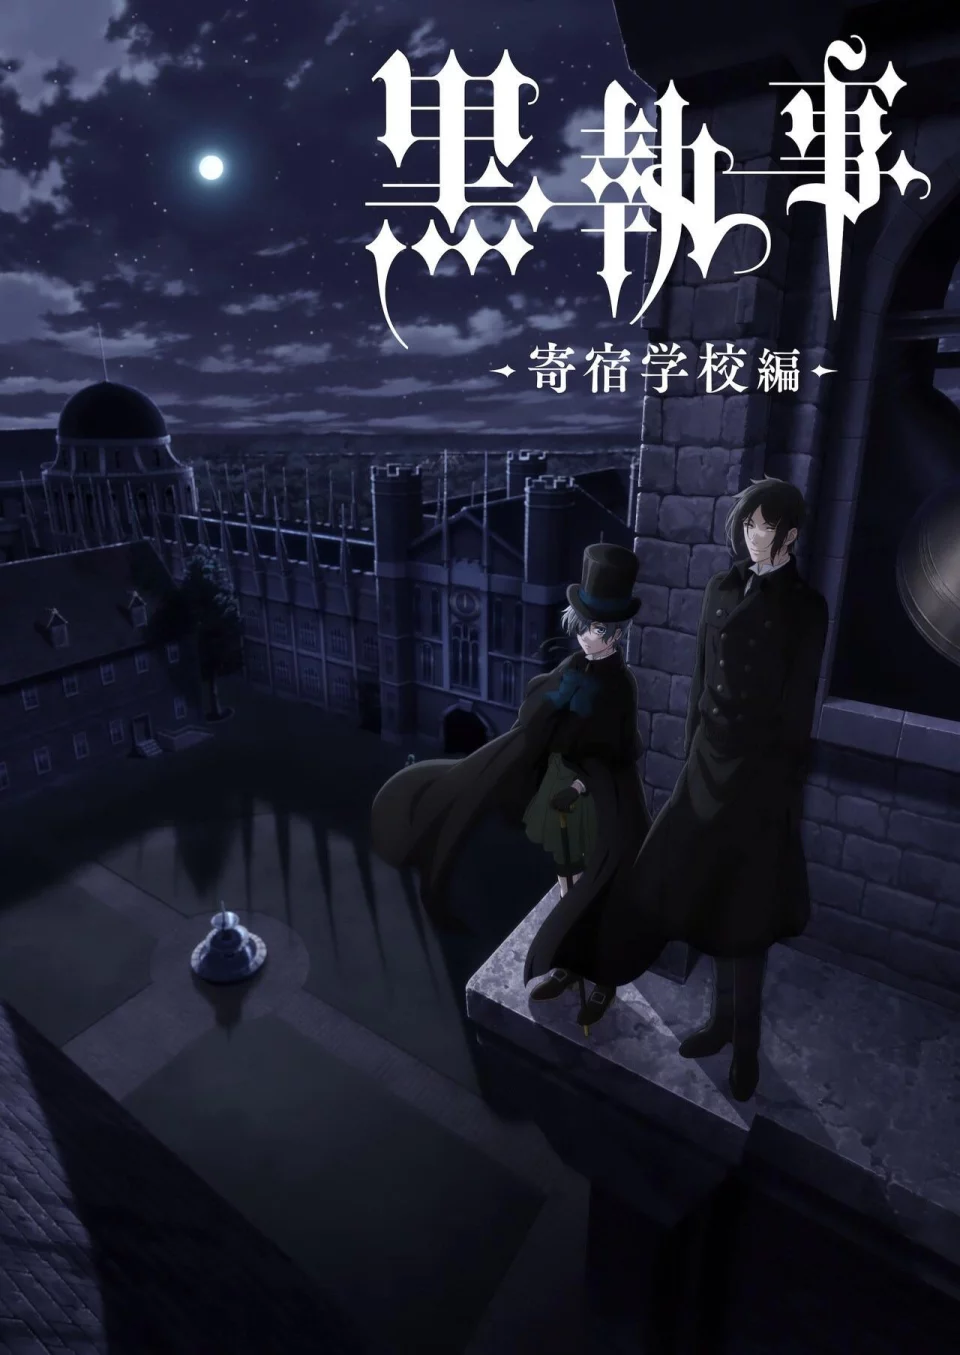 Black Butler Dates His Comeback With A New Trailer